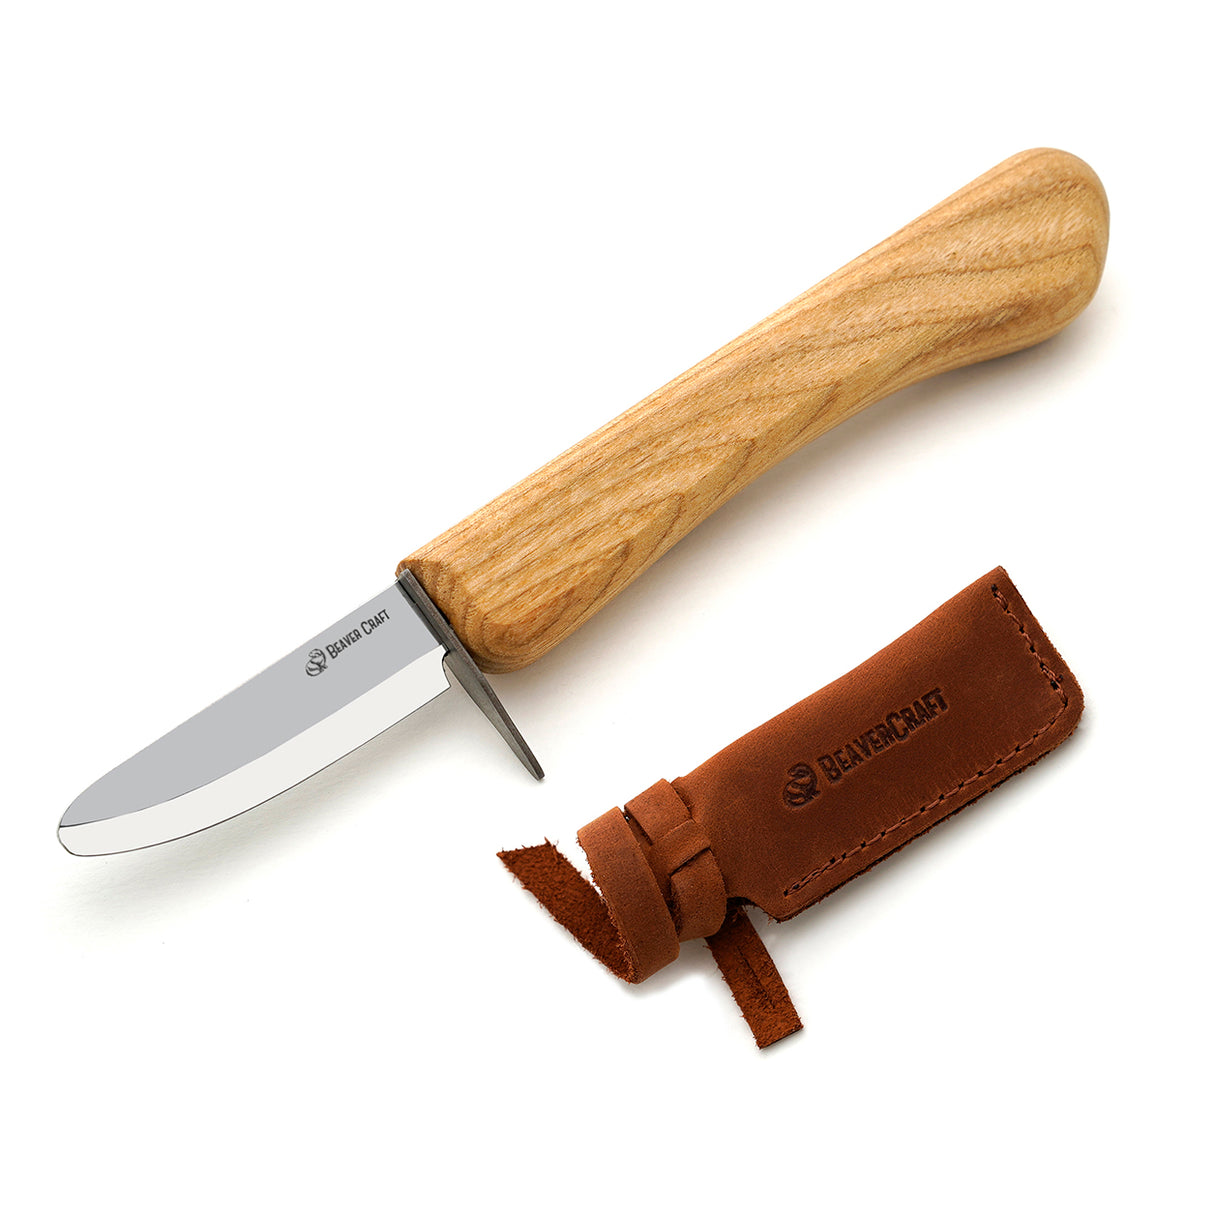 Children's Small Whittling Knife with Safety Guard